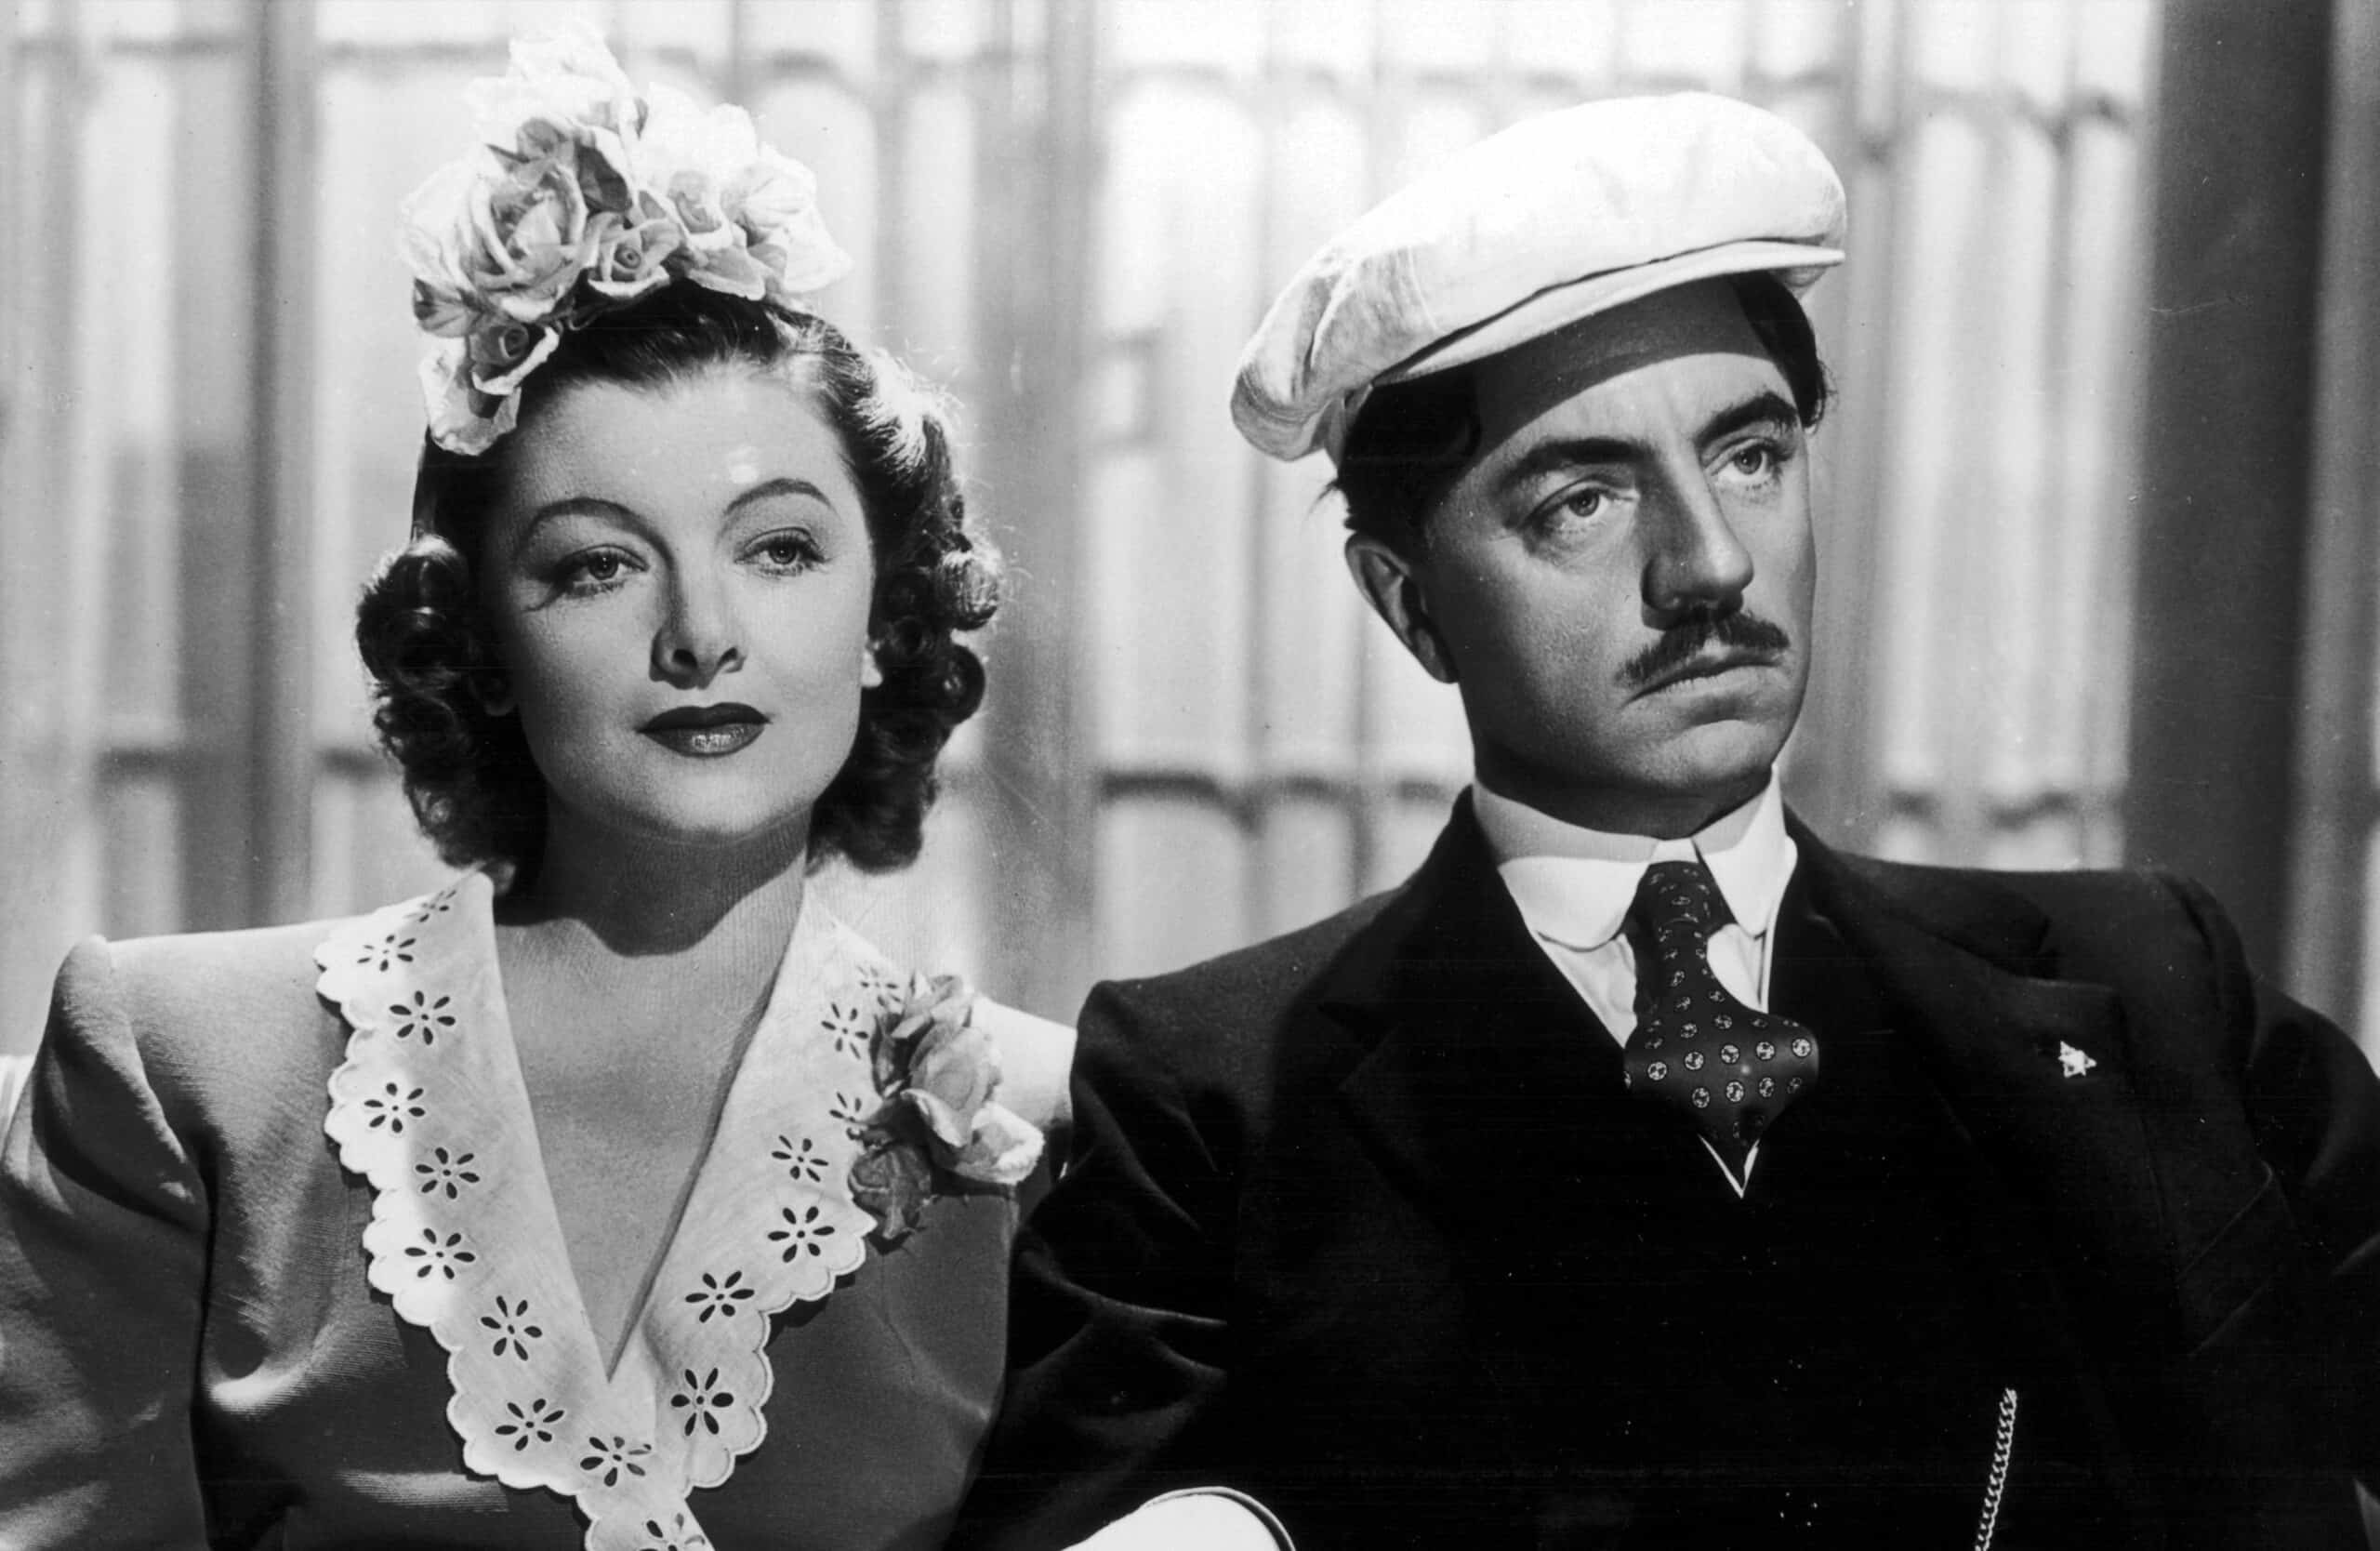 Myrna Loy and William Powell